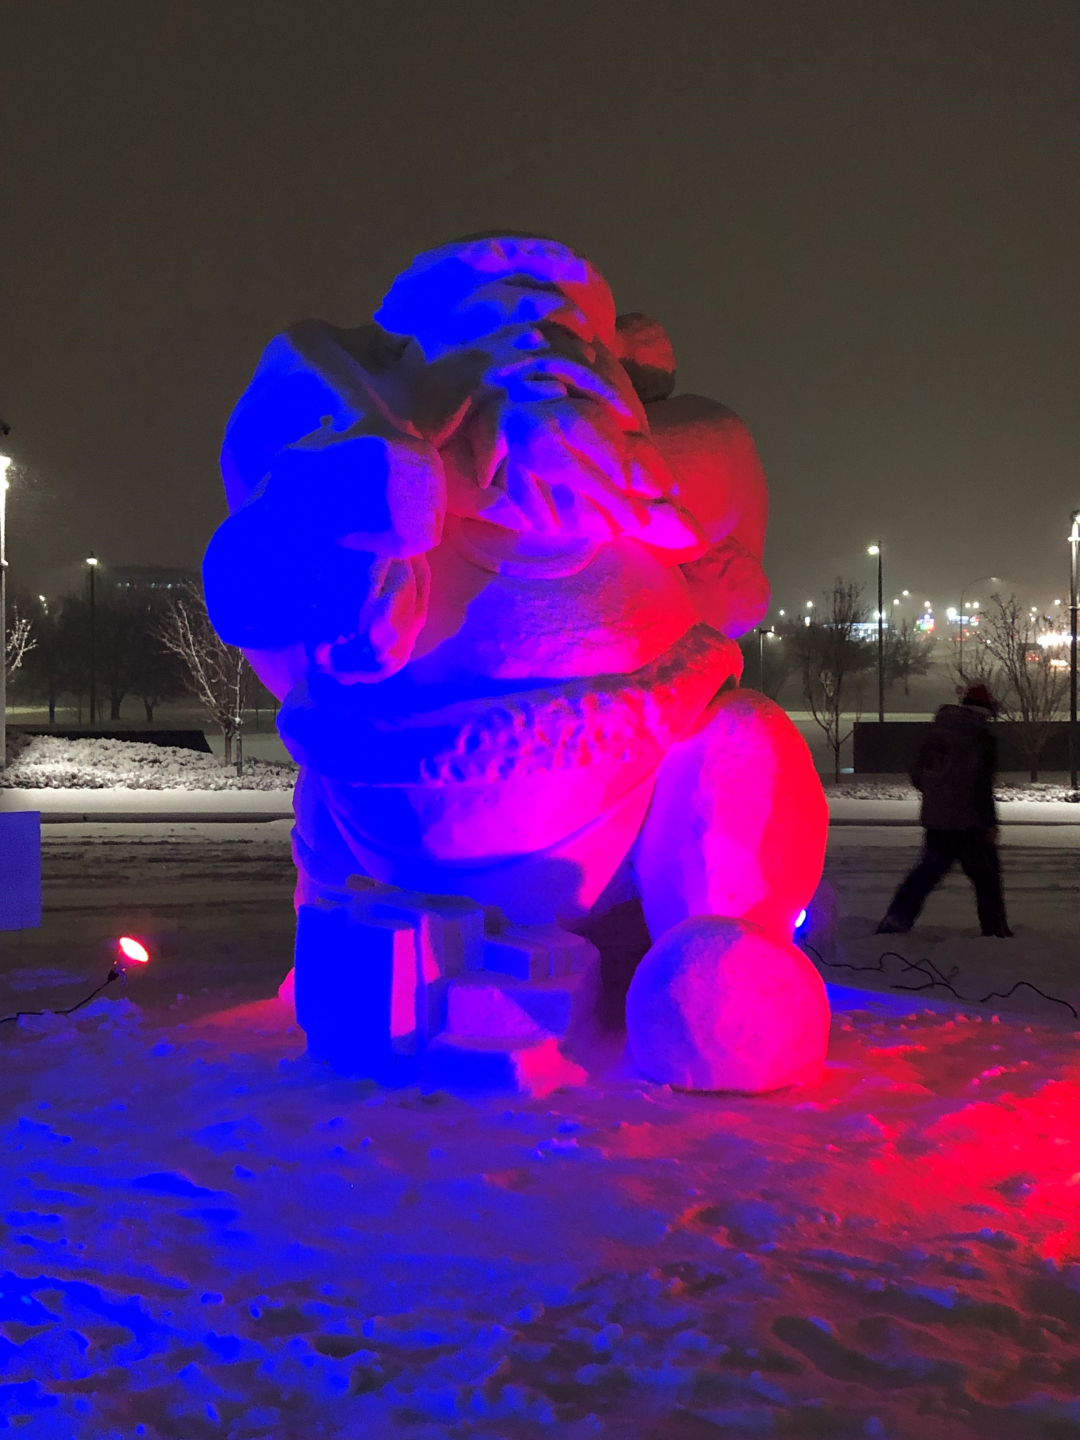 Large Santa Claus snow sculpture with blue and pink lights projected onto it